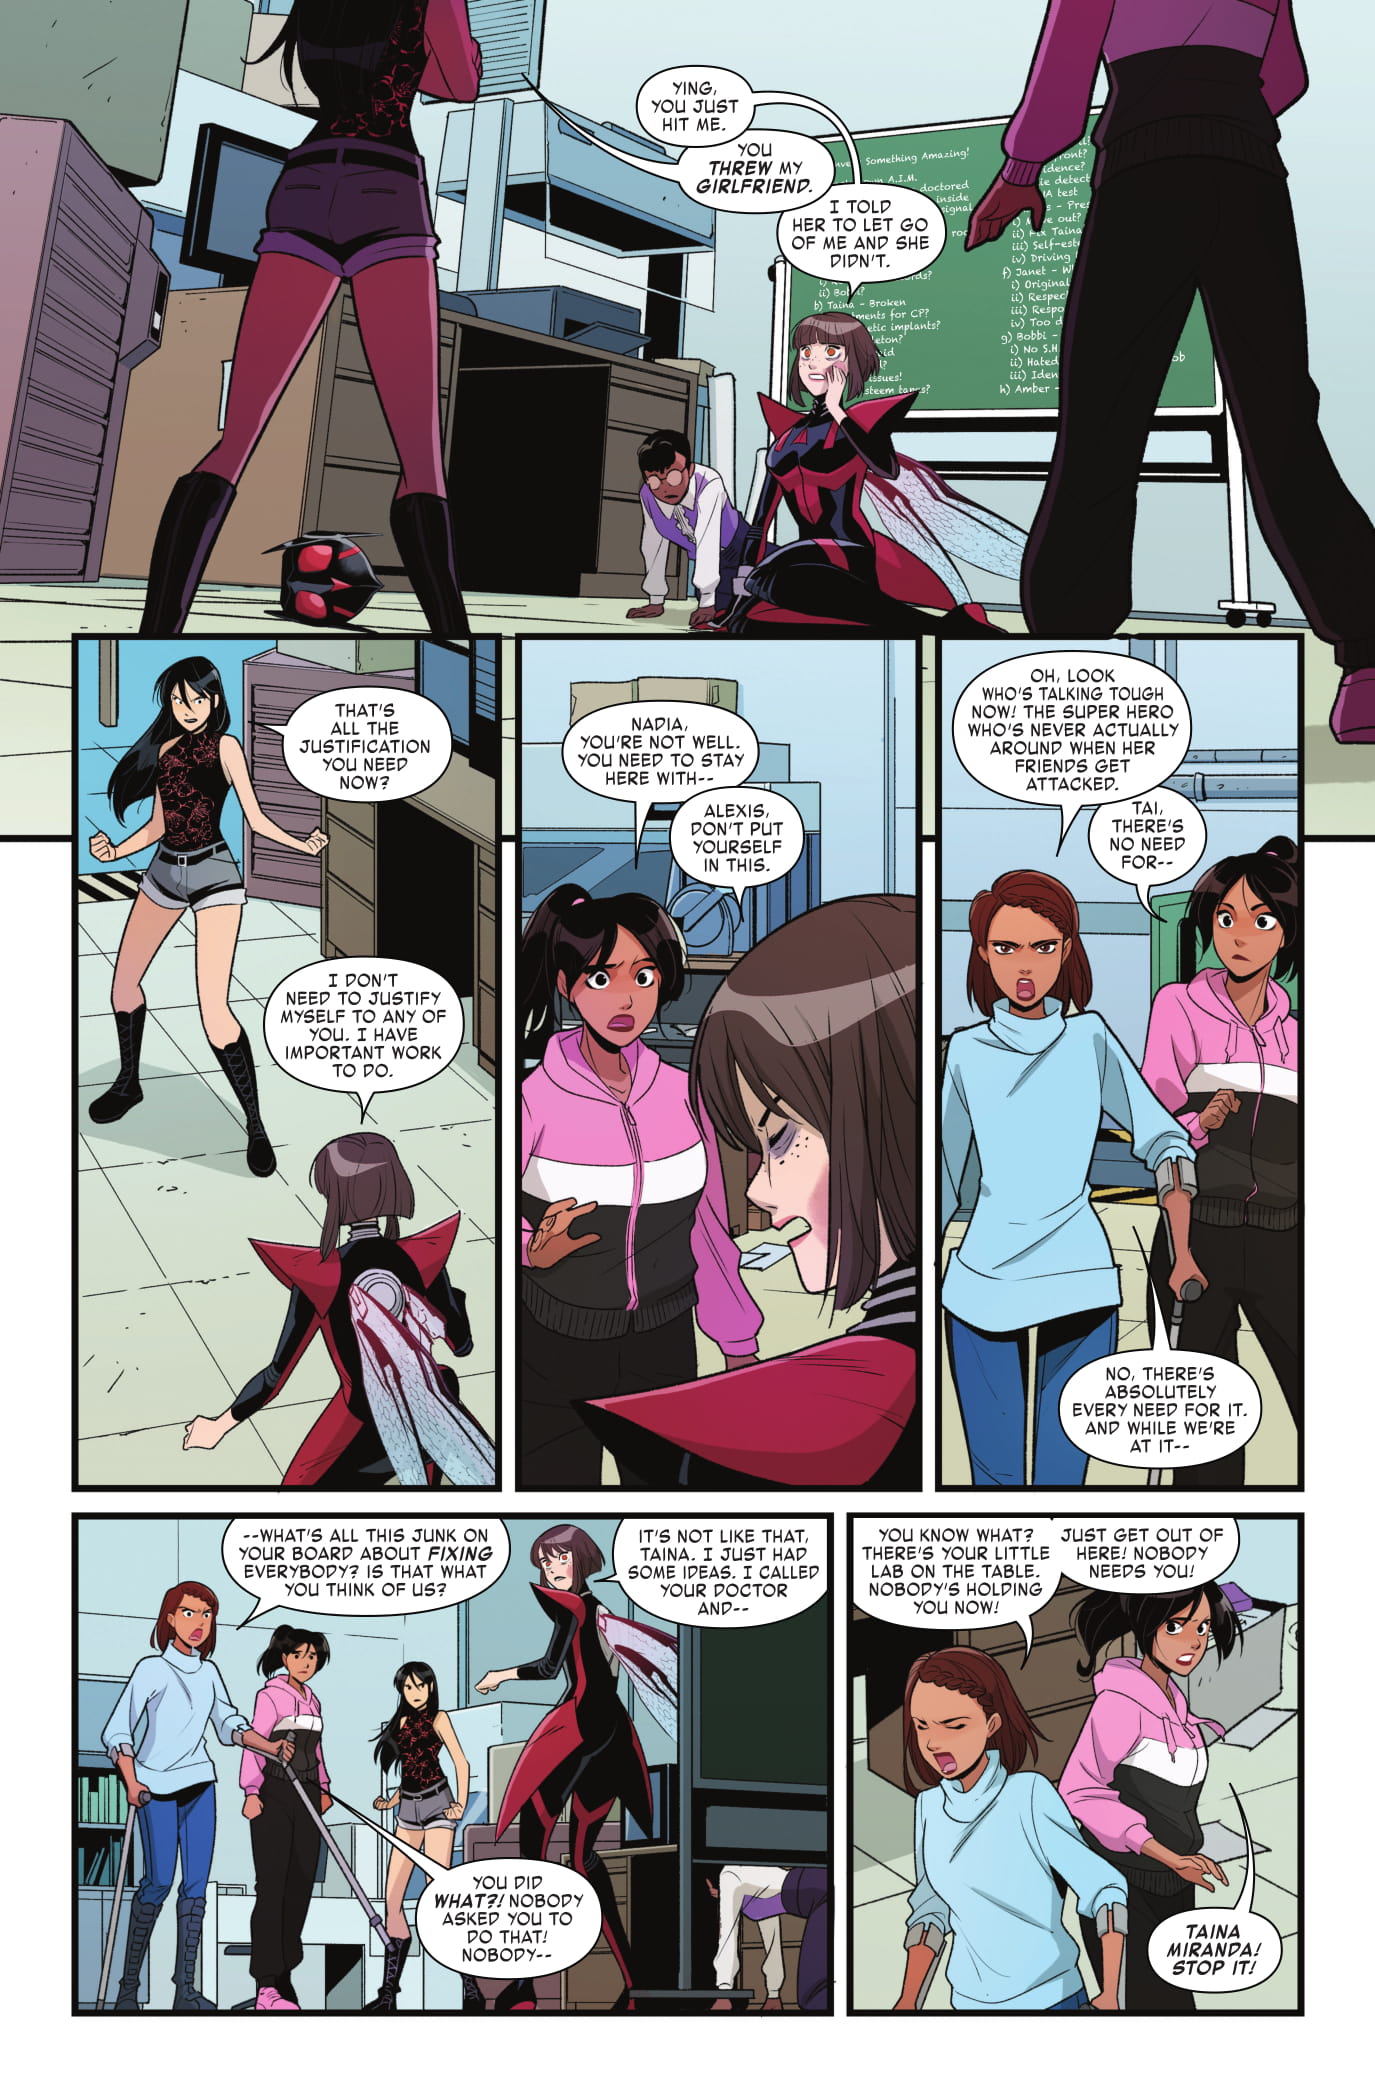 Unstoppable Wasp #5 page 1